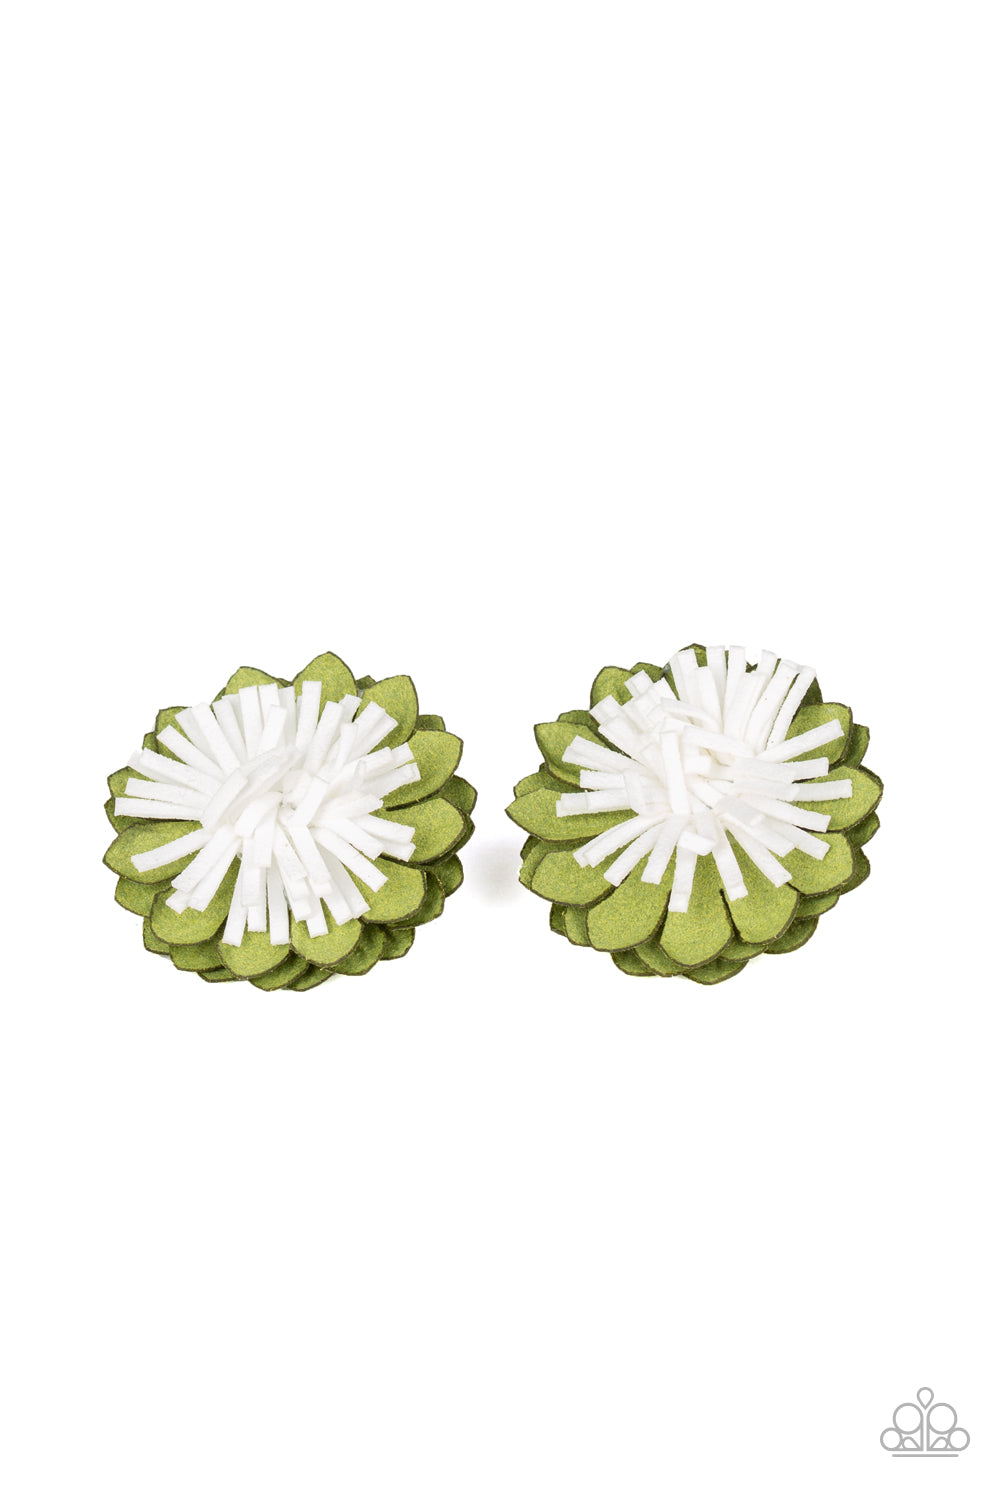 Blooming Bliss - Paparazzi Green Hair Clip - ssbling - Sharon’s Southern Bling 